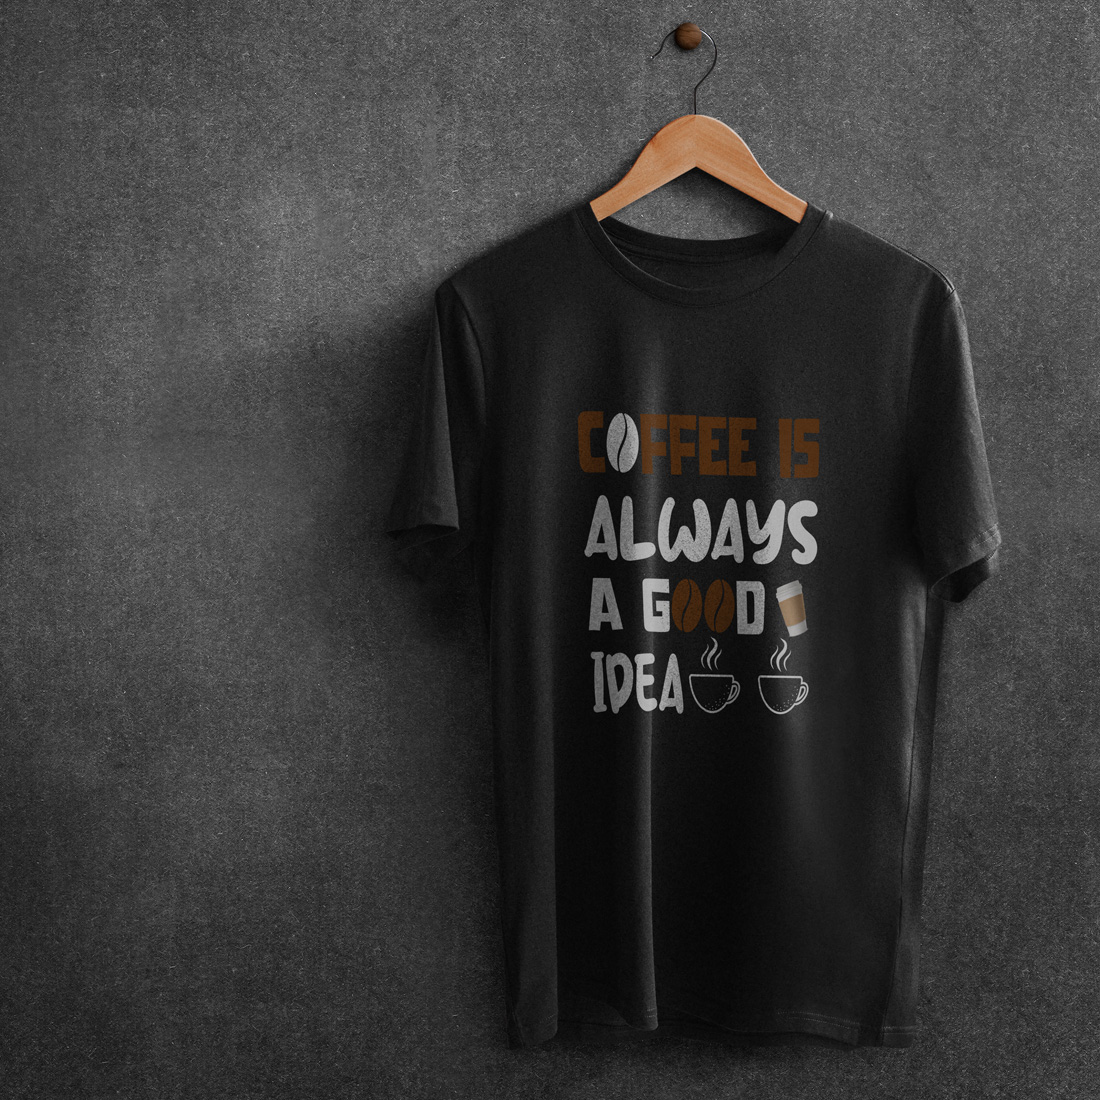 Picture of a black t-shirt with a wonderful print on the theme of coffee